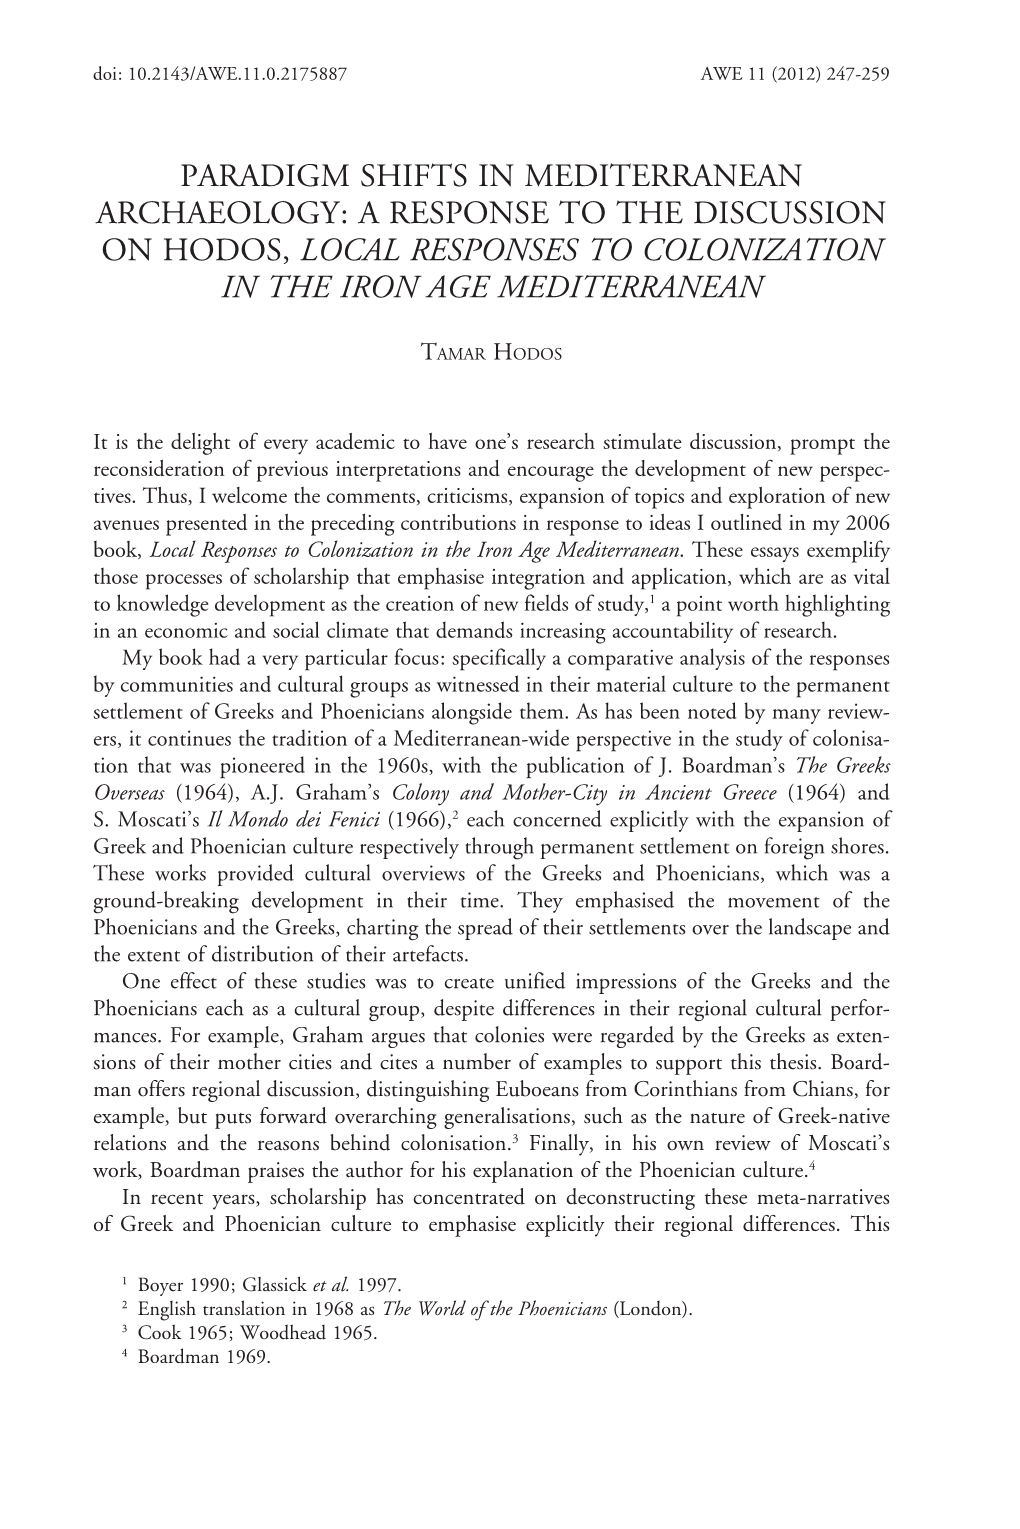 Paradigm Shifts in Mediterranean Archaeology: a Response to the Discussion on Hodos, Local Responses to Colonization in the Iron Age Mediterranean